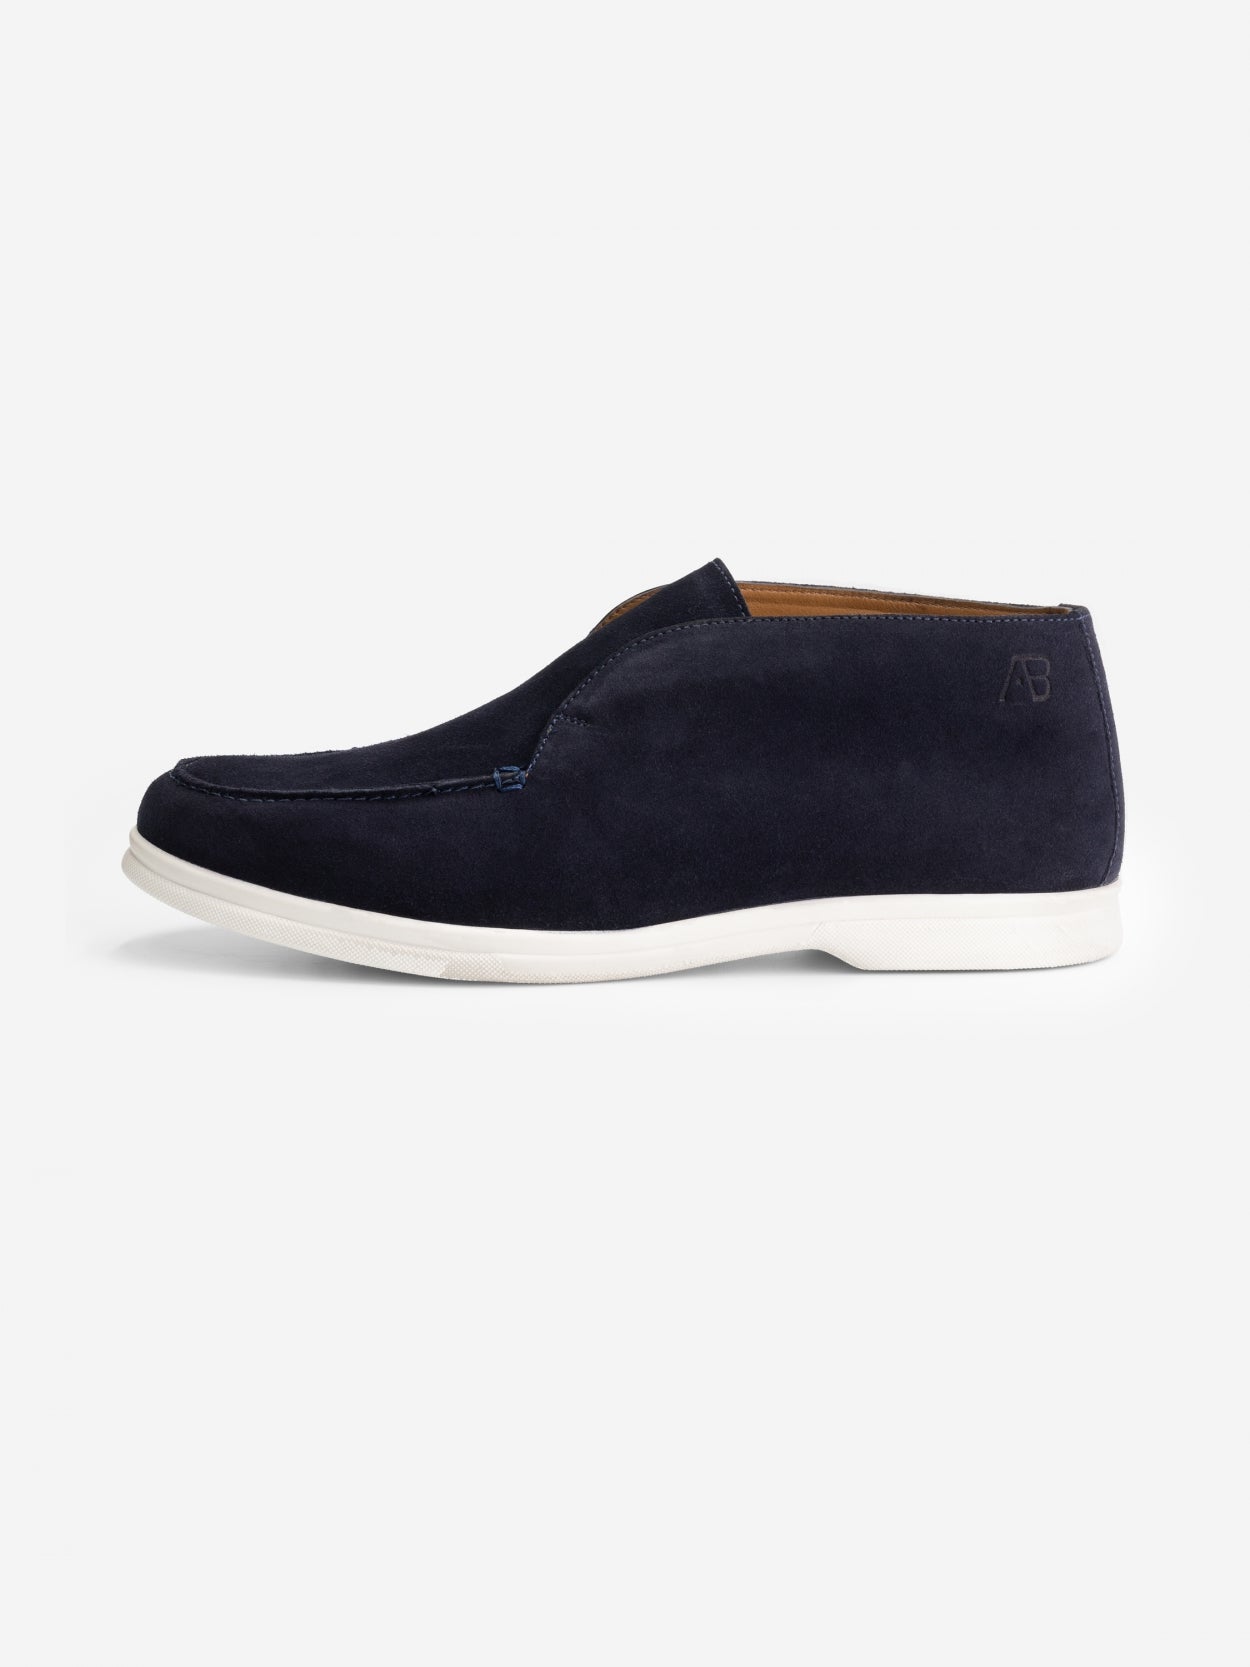 AB Lifestyle High Loafer Donker Blauw